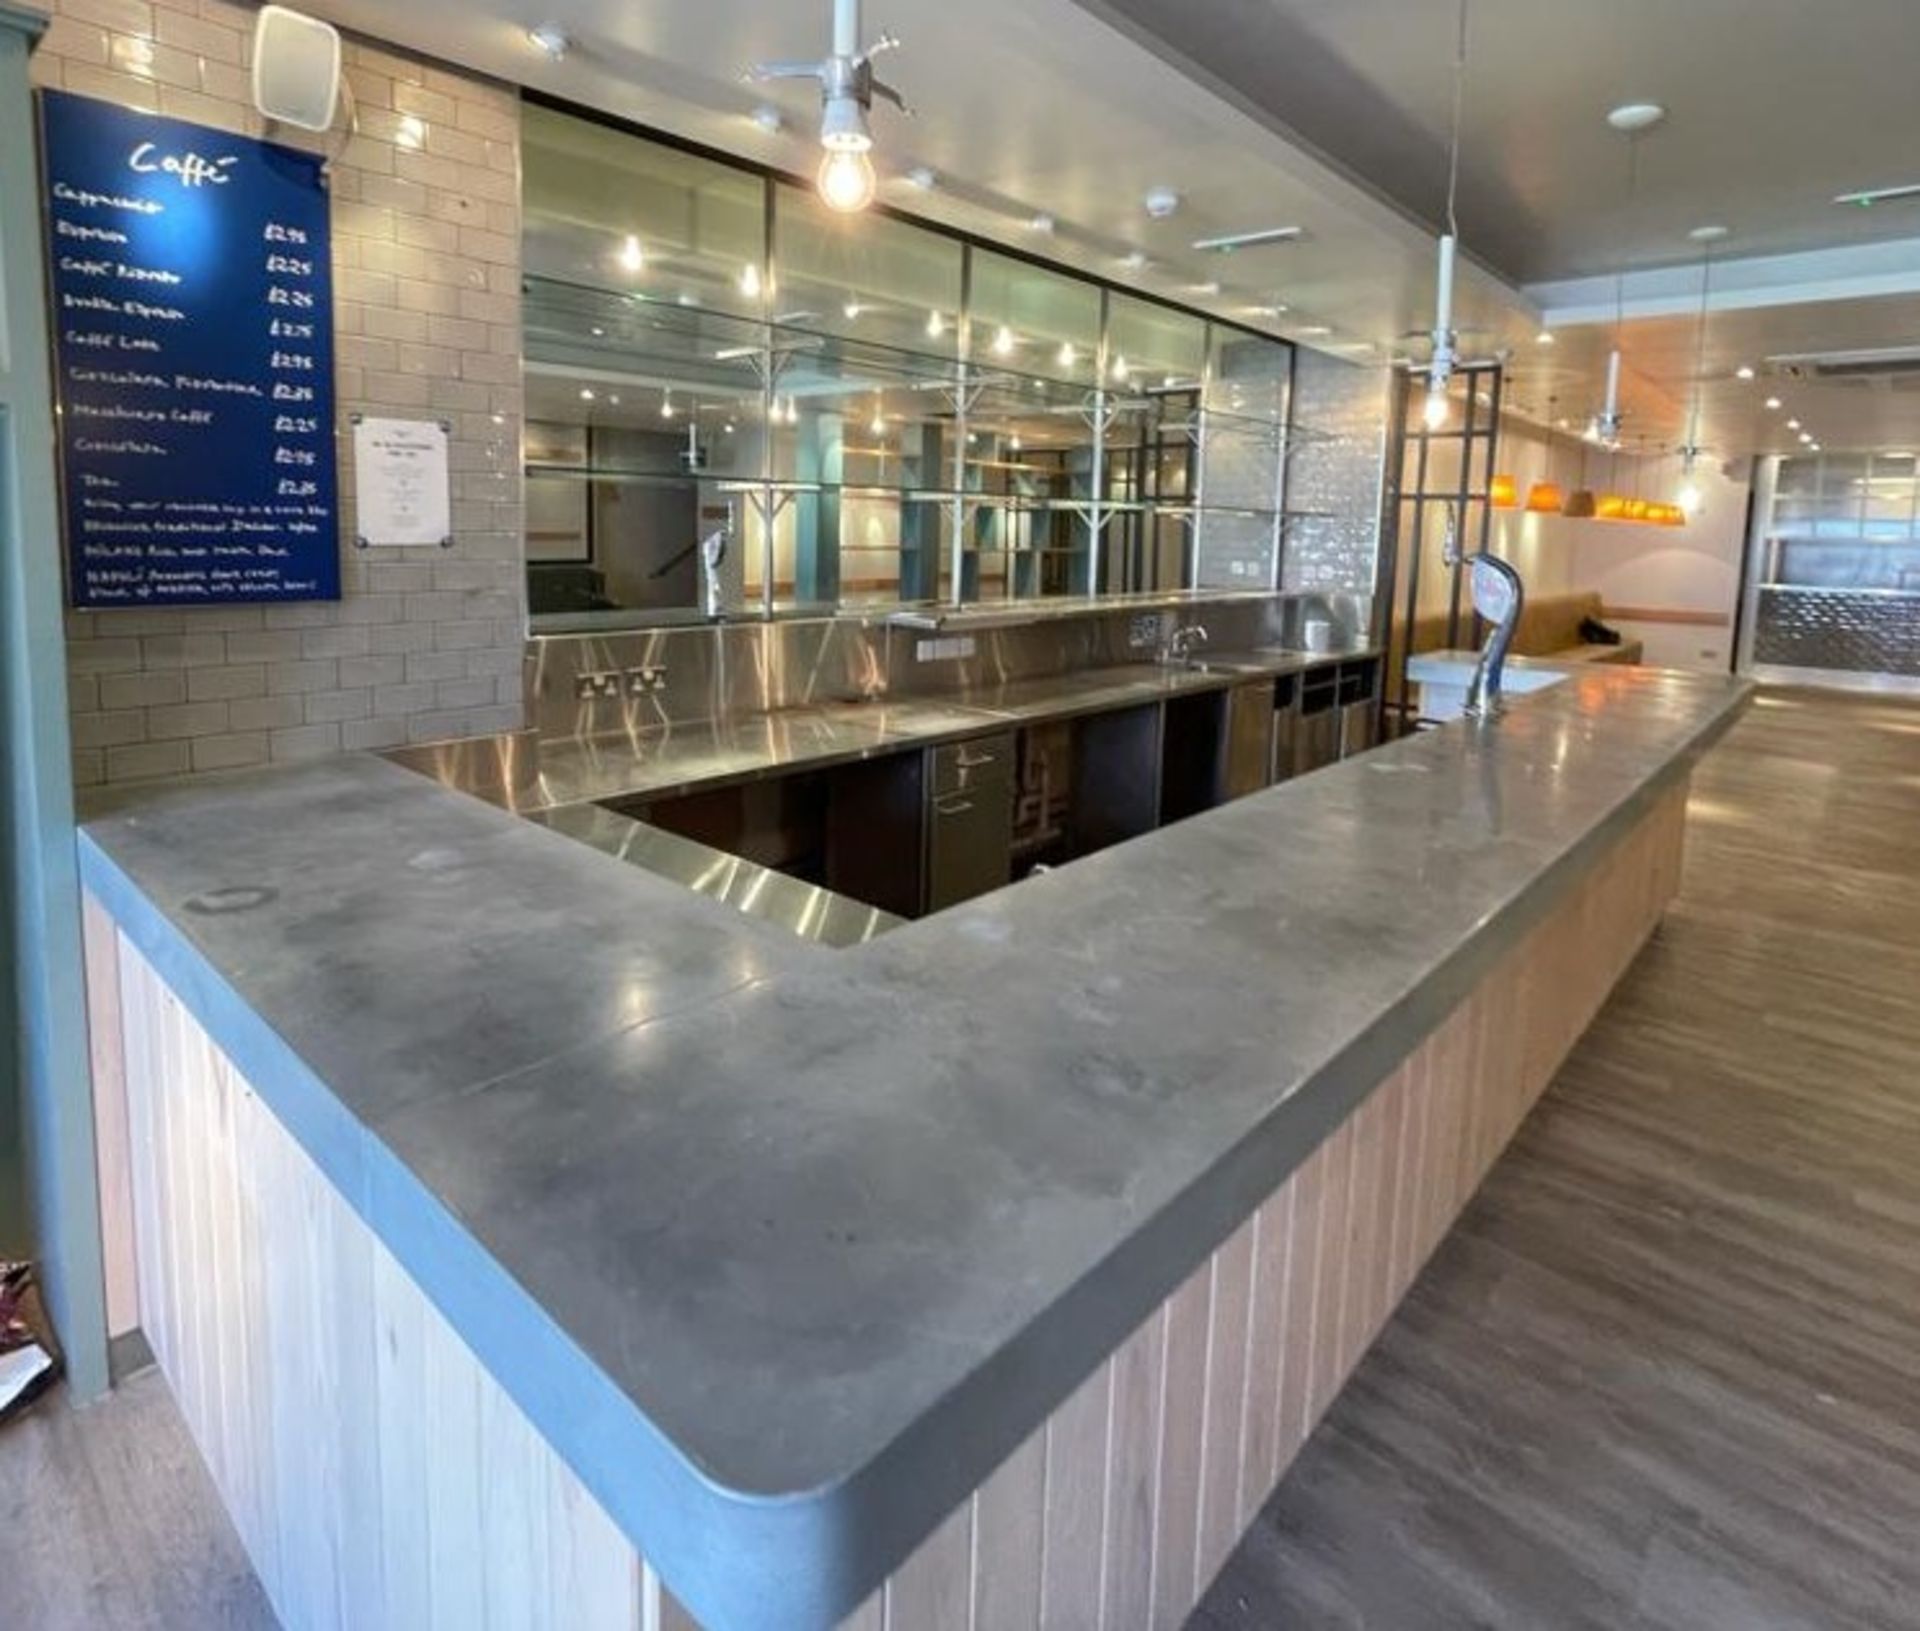 1 x Contemporary Restaurant Bar With Light Wood Panel Fascia, Sheet Metal Covered Bar Top, - Image 42 of 57